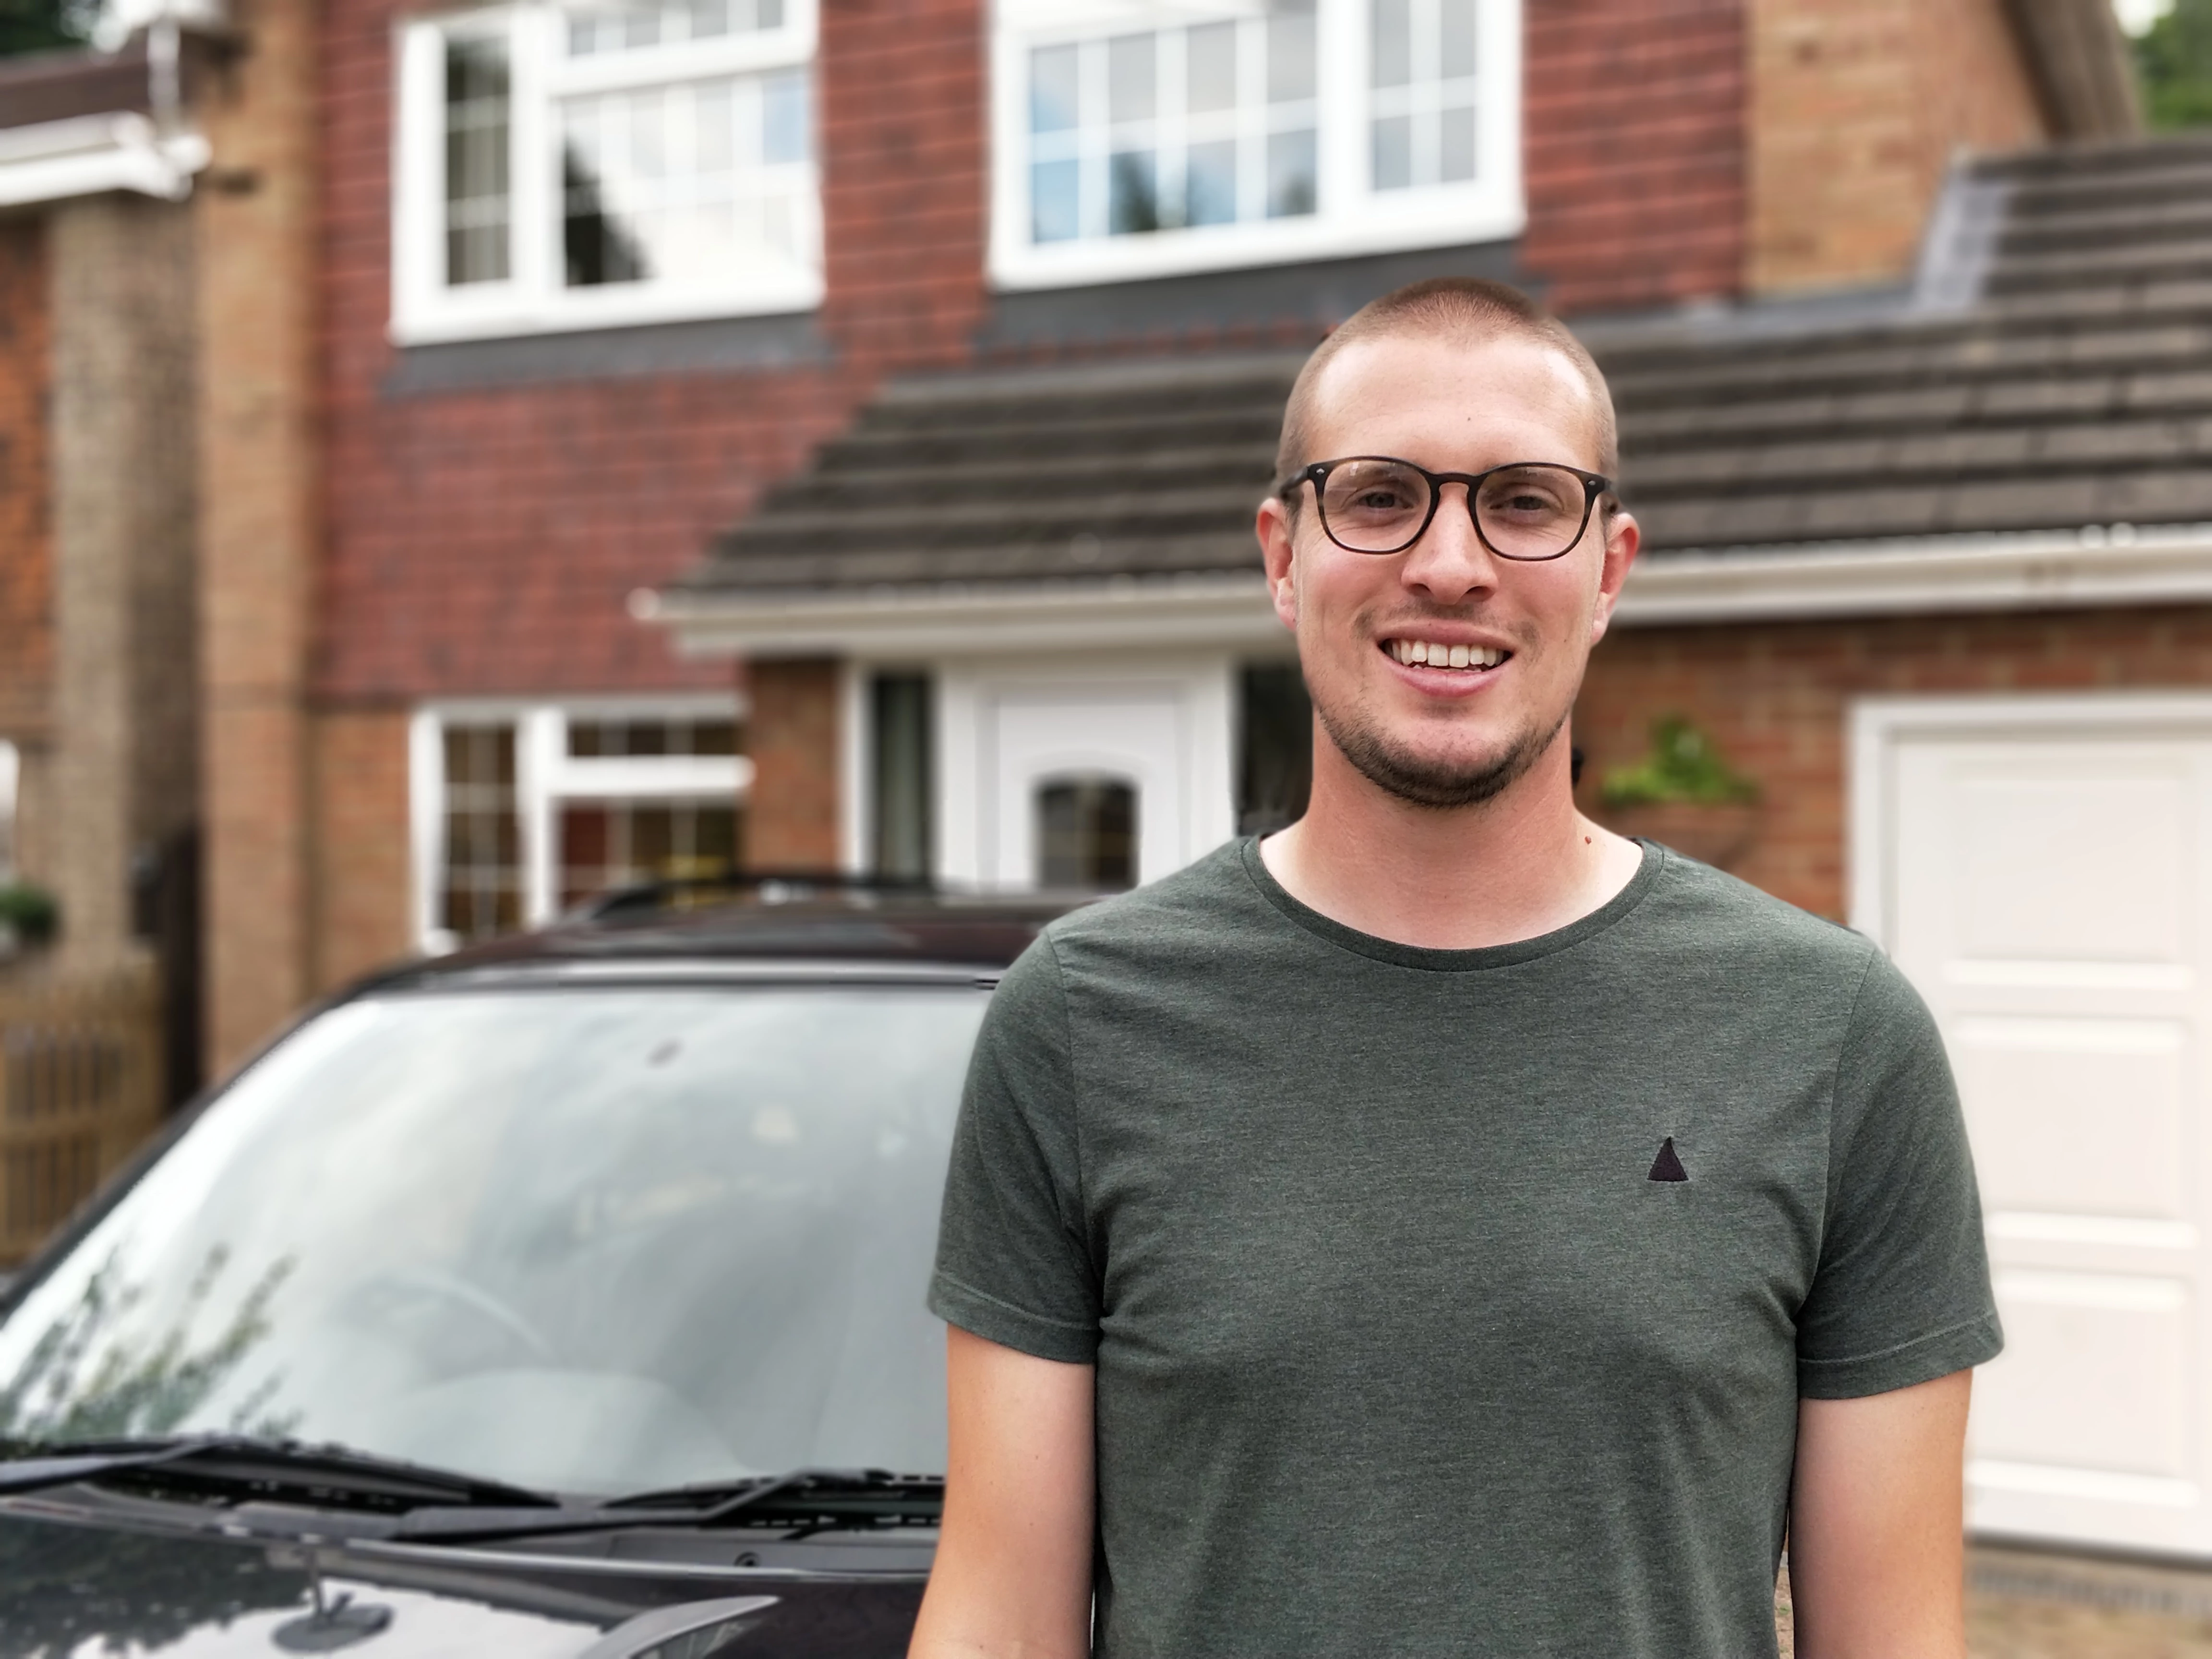 Basingstoke father urges drivers not to put their families at risk this summer by getting on track with regular eye tests